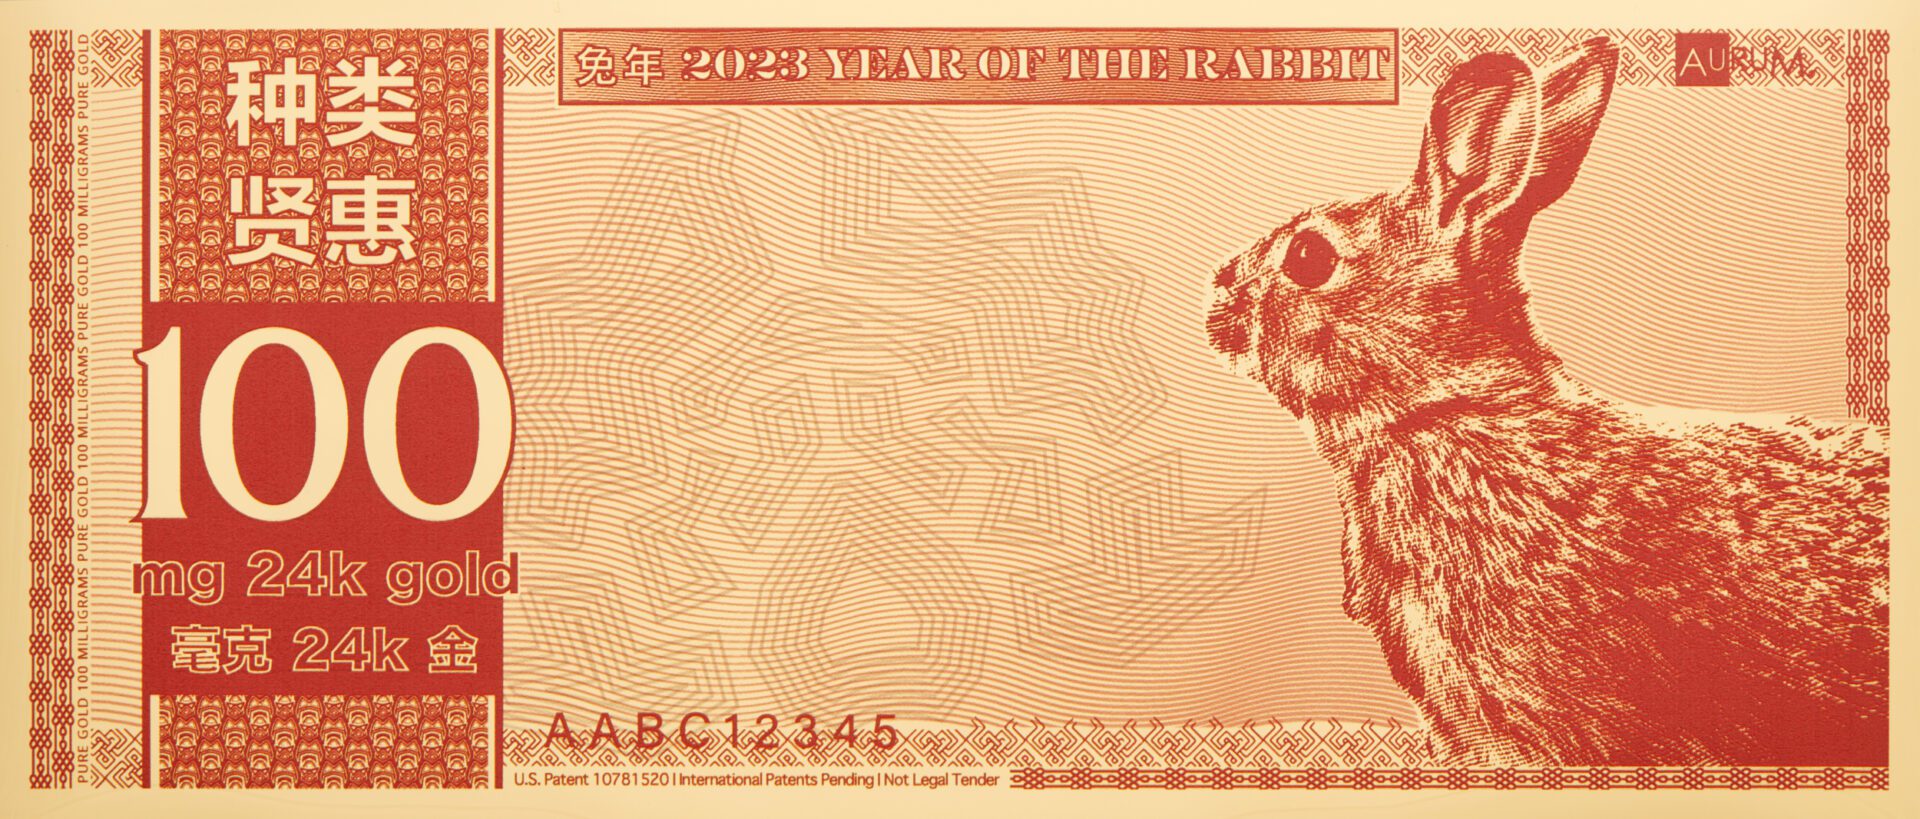 Obverse side of the 2023 Year of the Rabbit Aurum® bill.